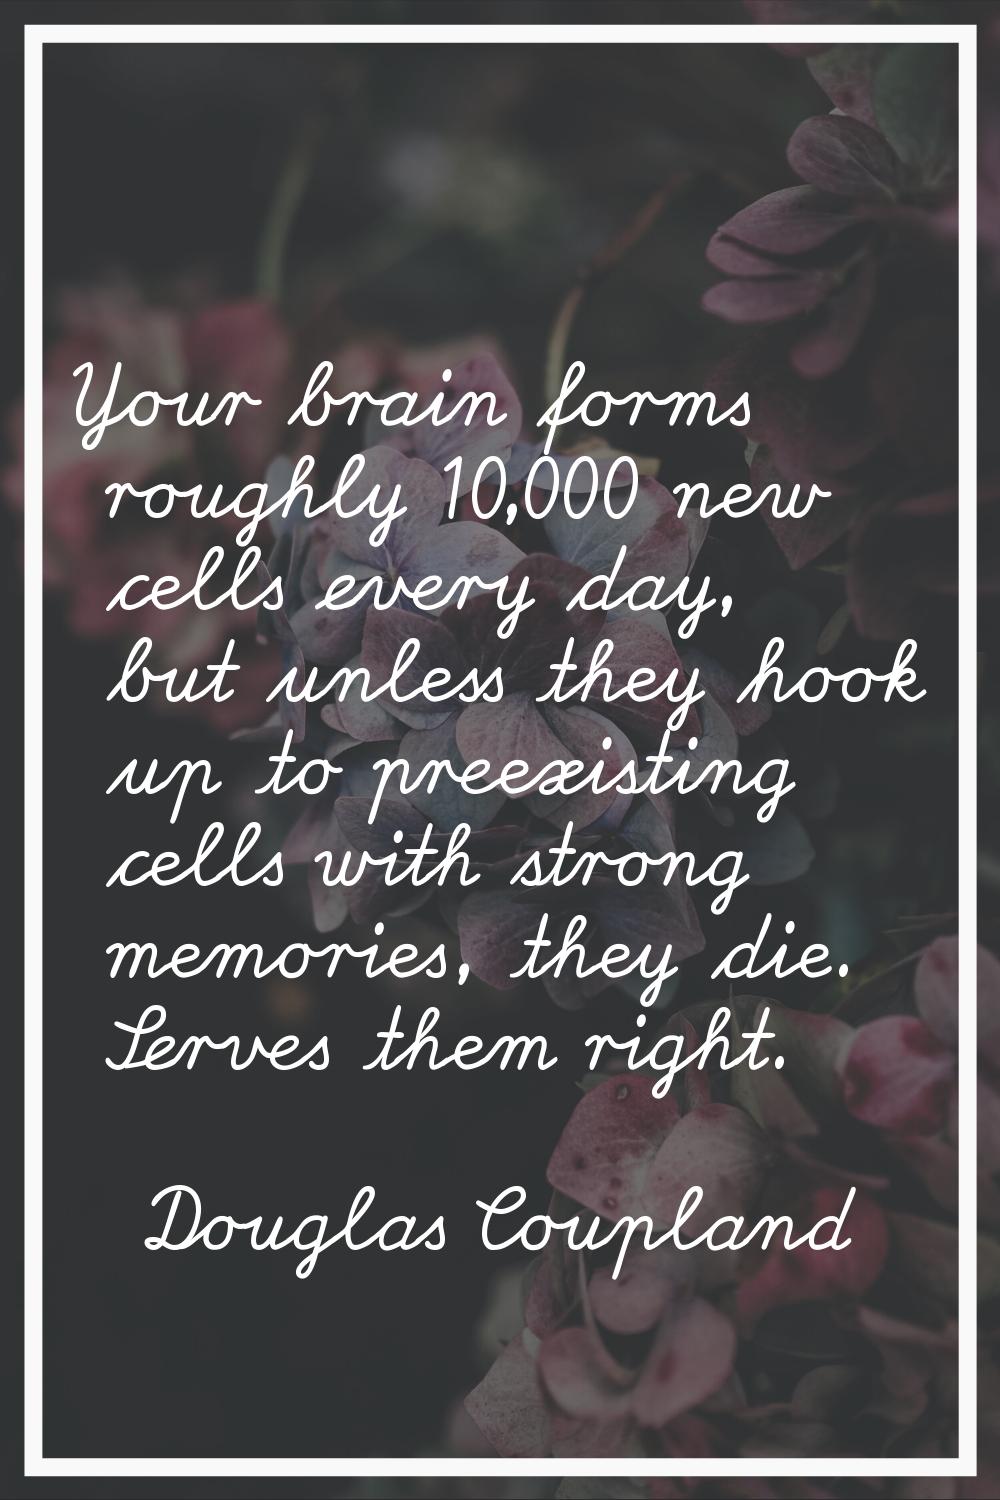 Your brain forms roughly 10,000 new cells every day, but unless they hook up to preexisting cells w